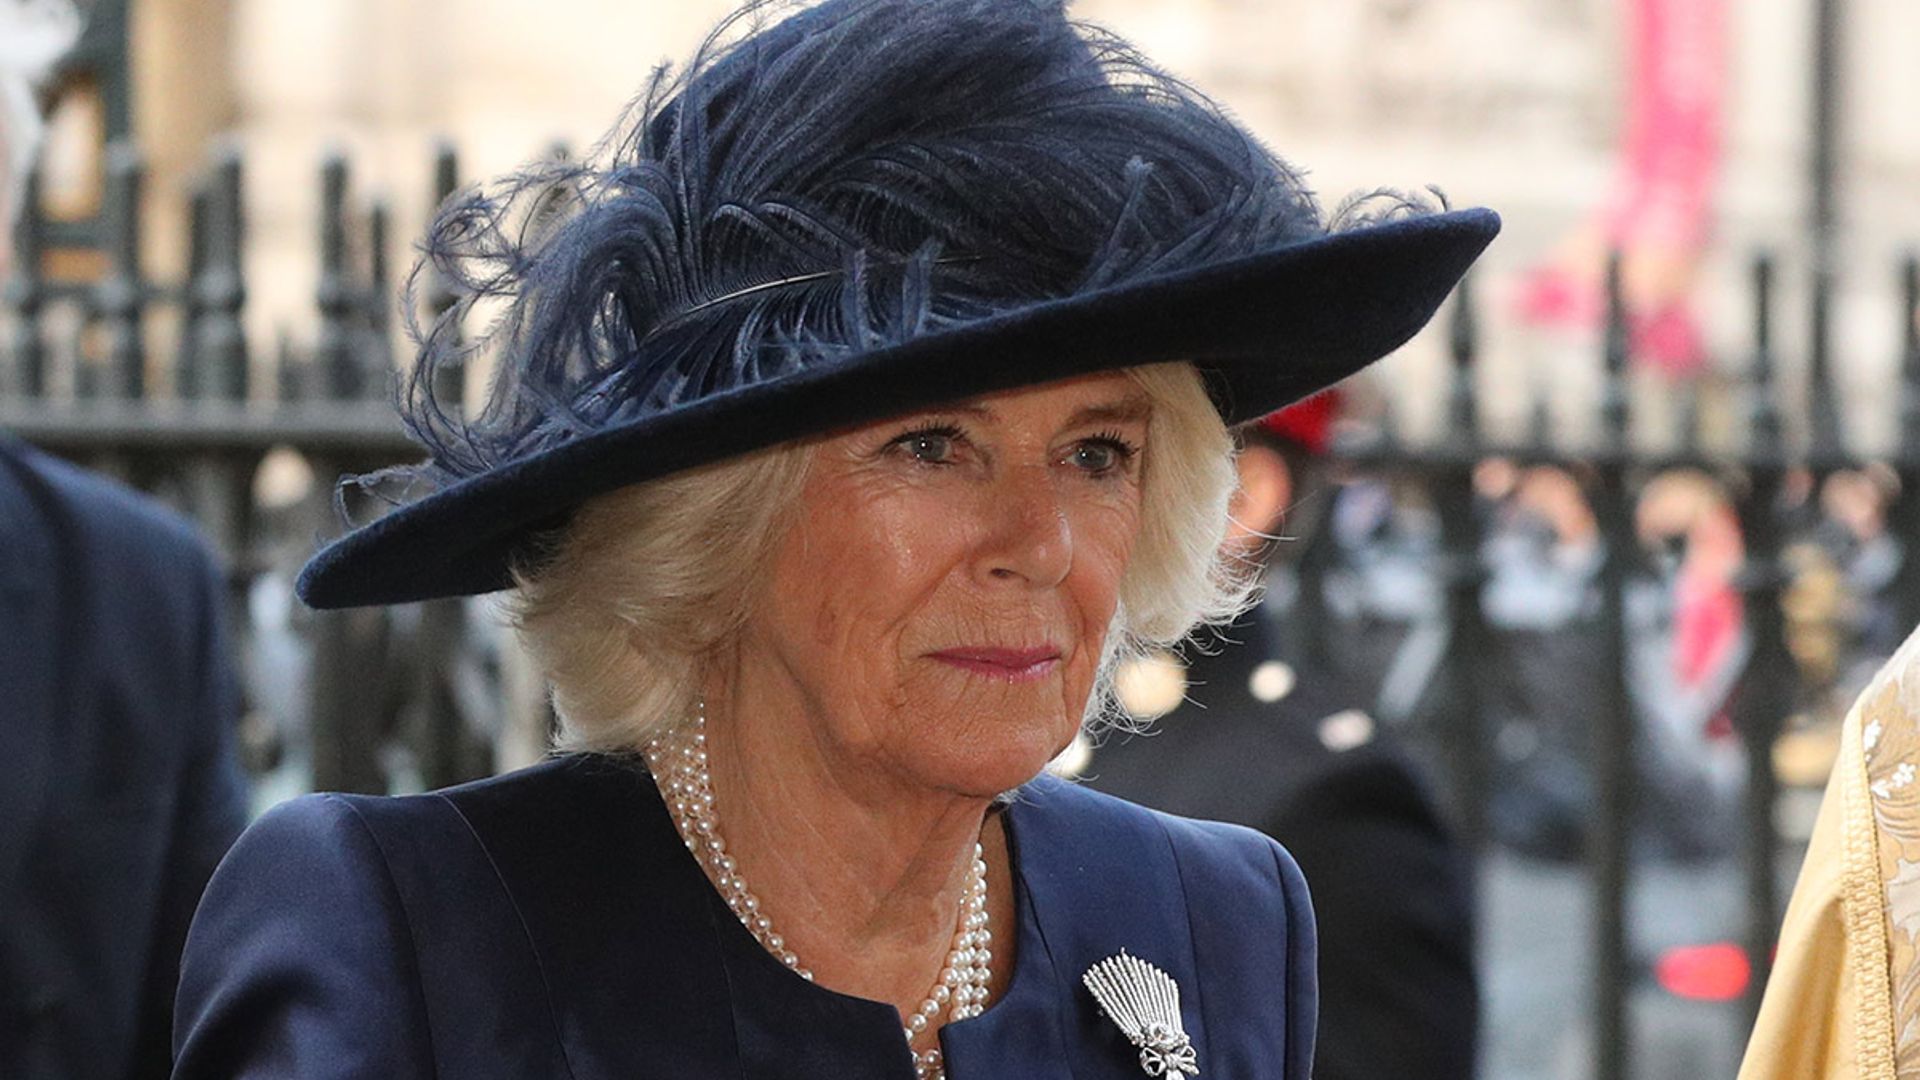 The Duchess of Cornwall carries the Queen's favourite handbag brand in London